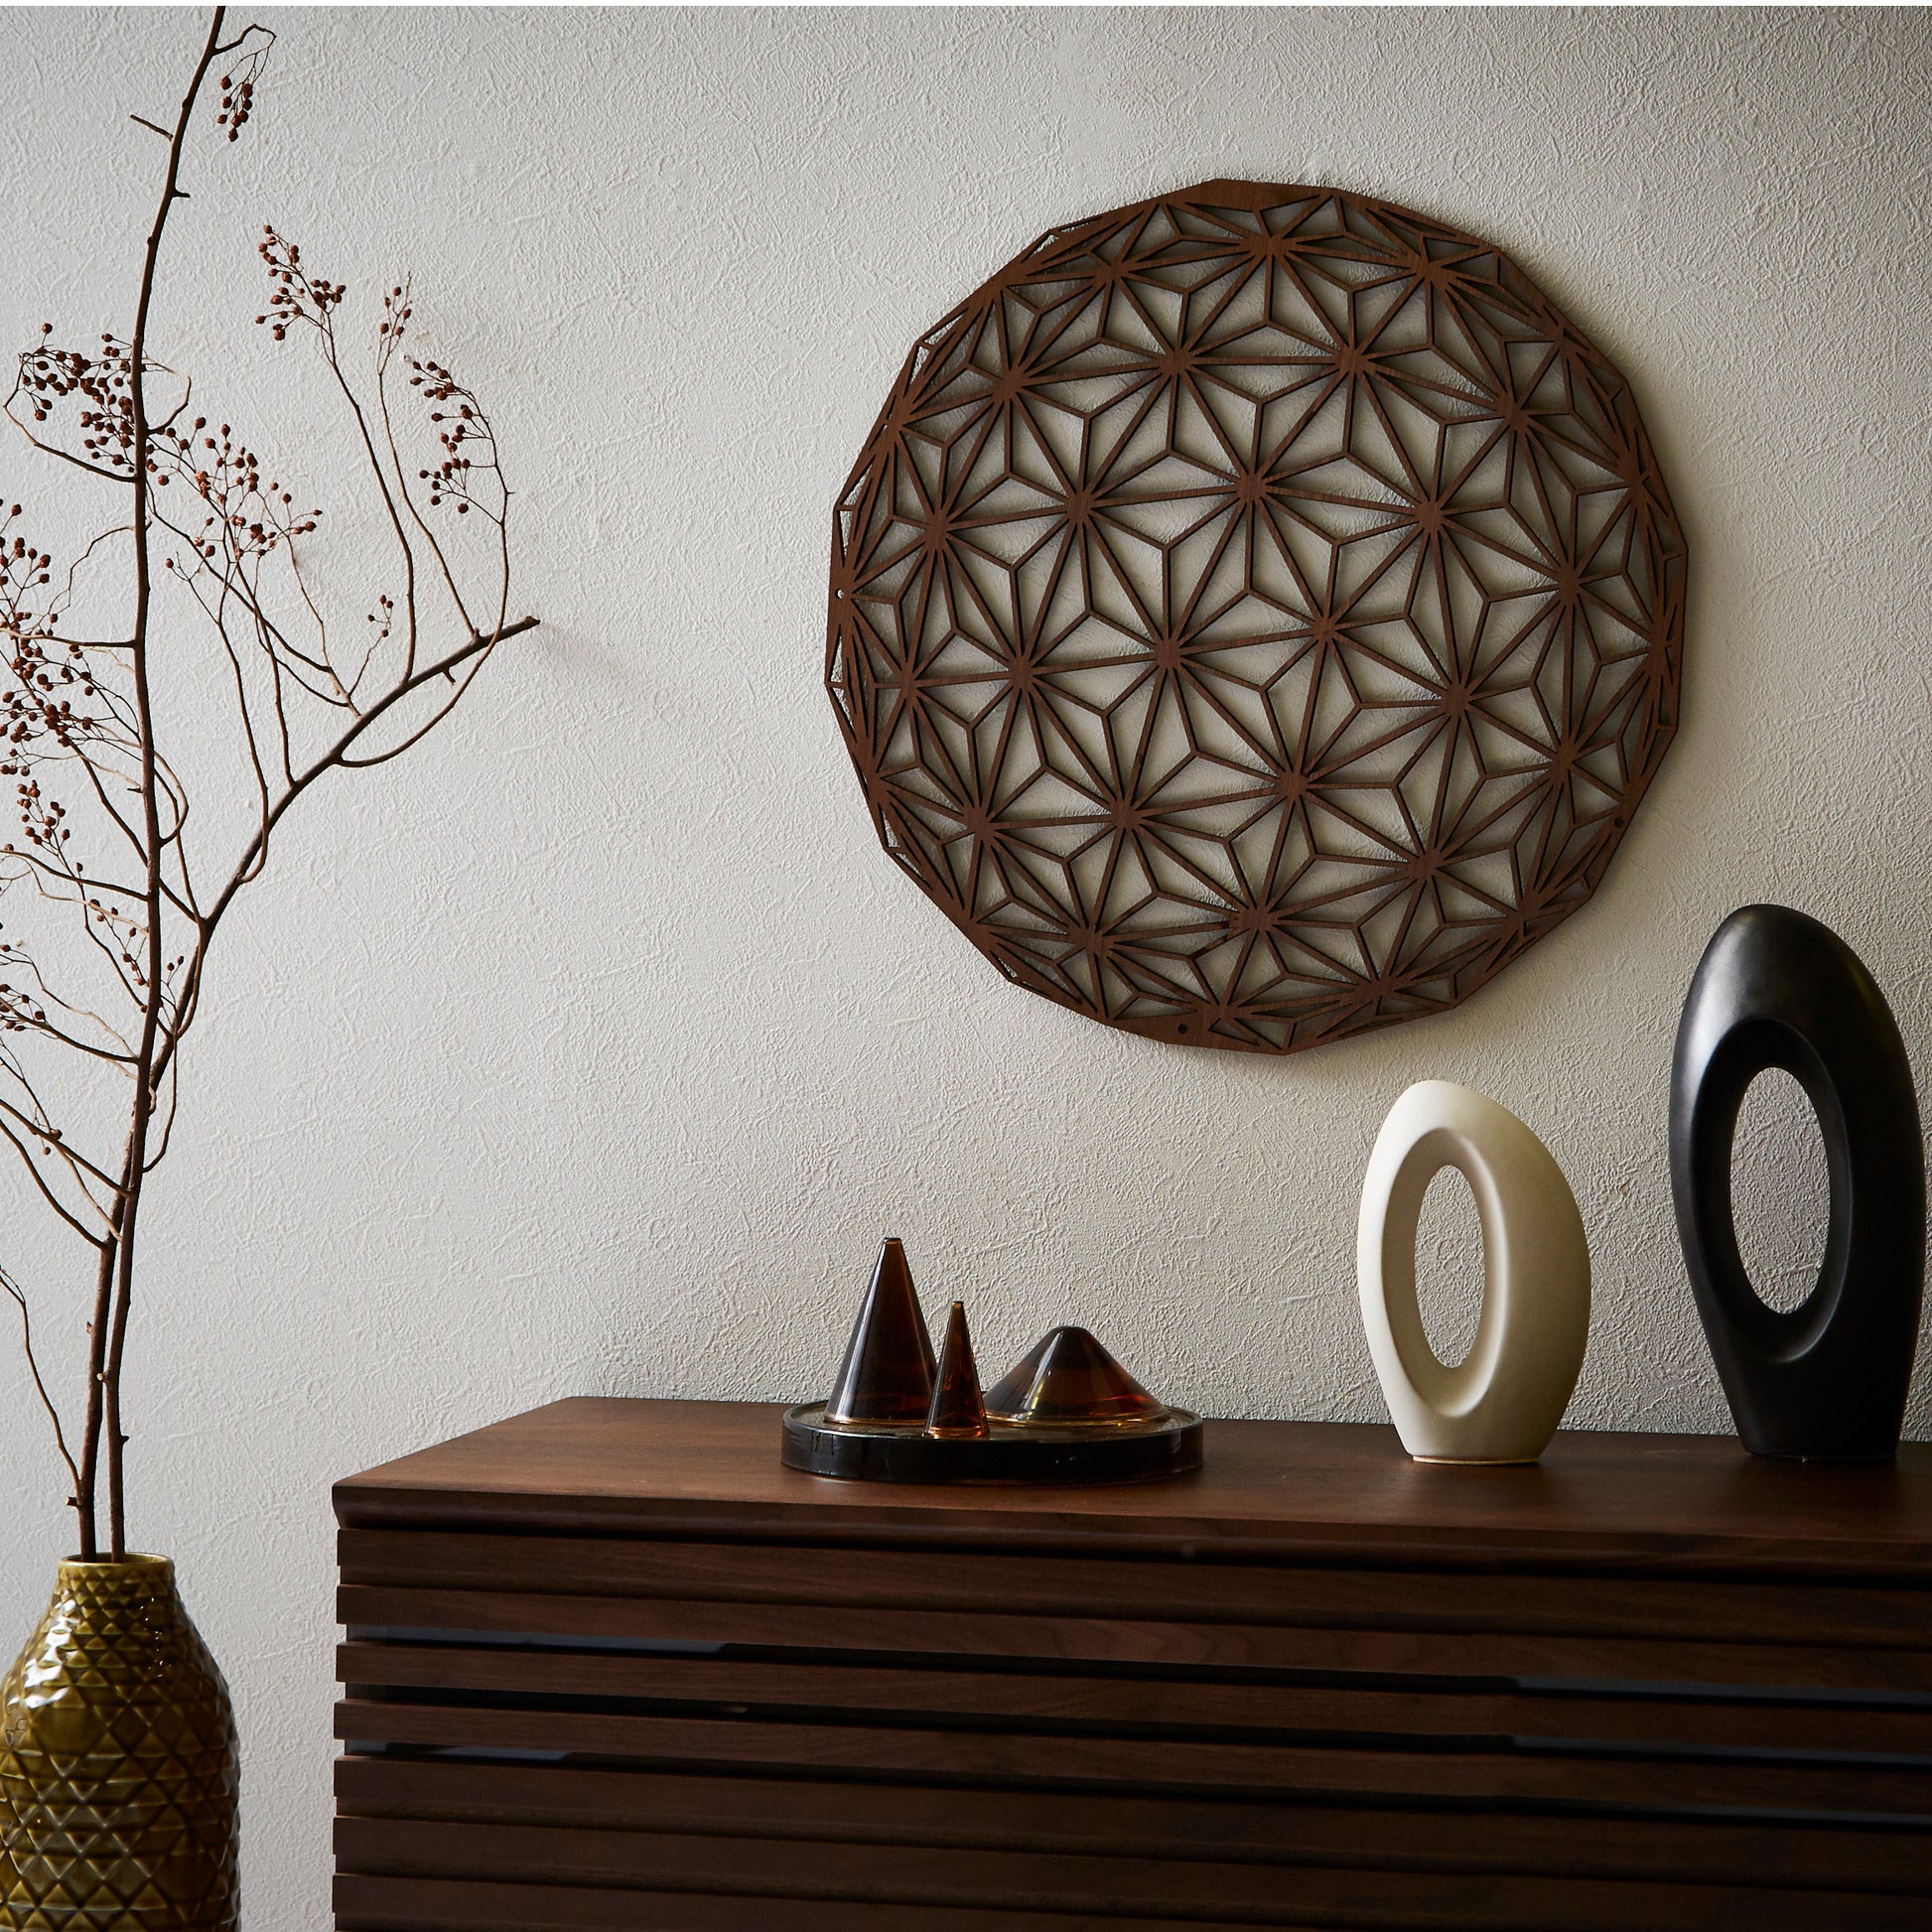 A room decorated with Japanese style, circular wall decorations. The traditional Japanese hemp leaf pattern is distinctive.